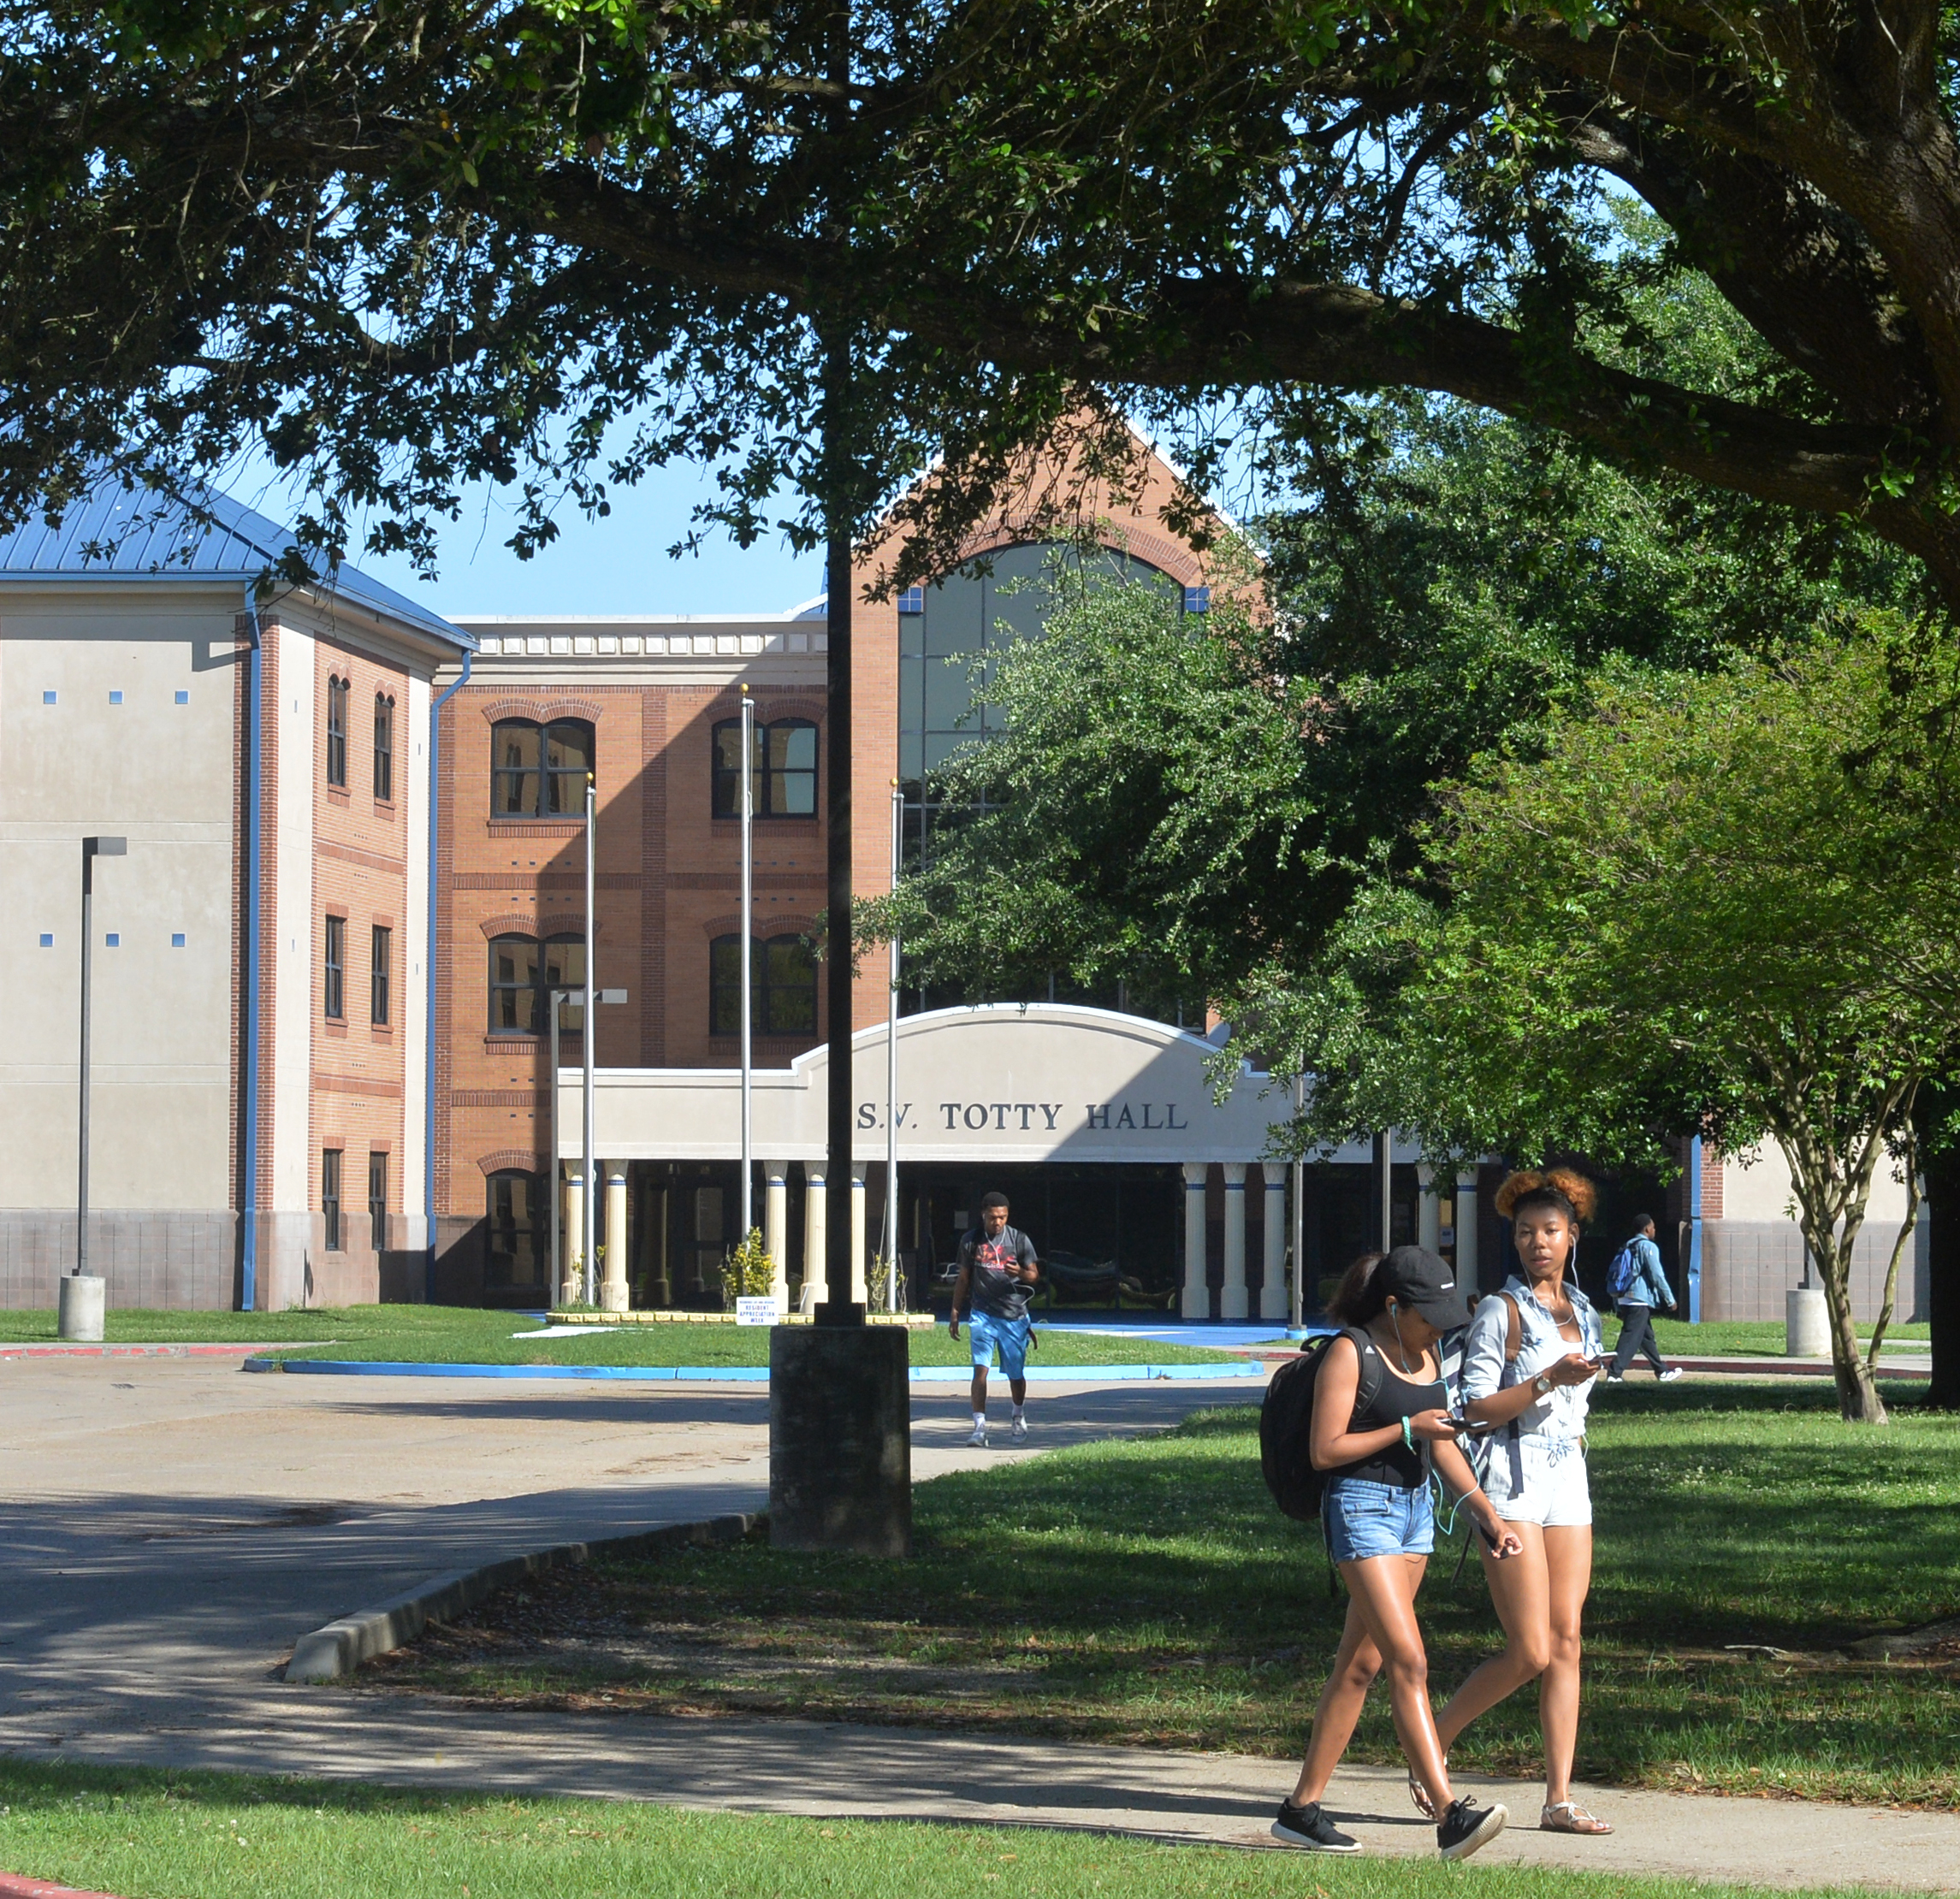 Southern University's fall undergraduate enrollment continues upward trend  | Southern University and A&M College